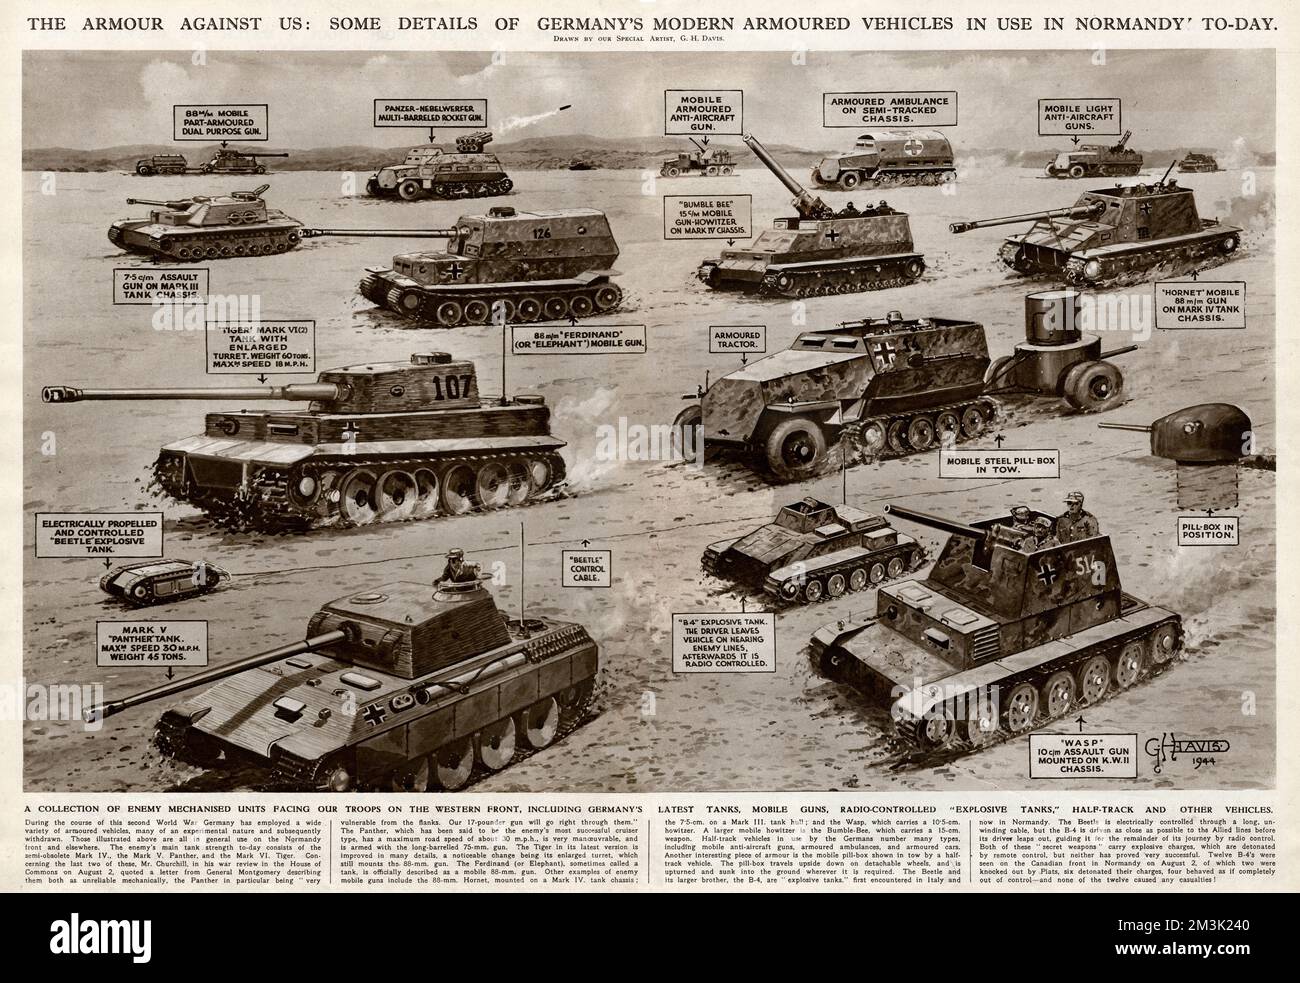 German modern armoured vehicles used during the Battle for Normandy, Second World War. The vehicles shown include Panther and Tiger tanks (left foreground), two assault guns (one a Wasp), Elephant and Hornet tank destroyers, several anti-aircraft vehicles, an armoured ambulance and two remote controlled explosive tanks (a B4 and a Beetle).  NB: these vehicles were only the ones that the Allies knew about and let information be published about at the time.  1944 Stock Photo